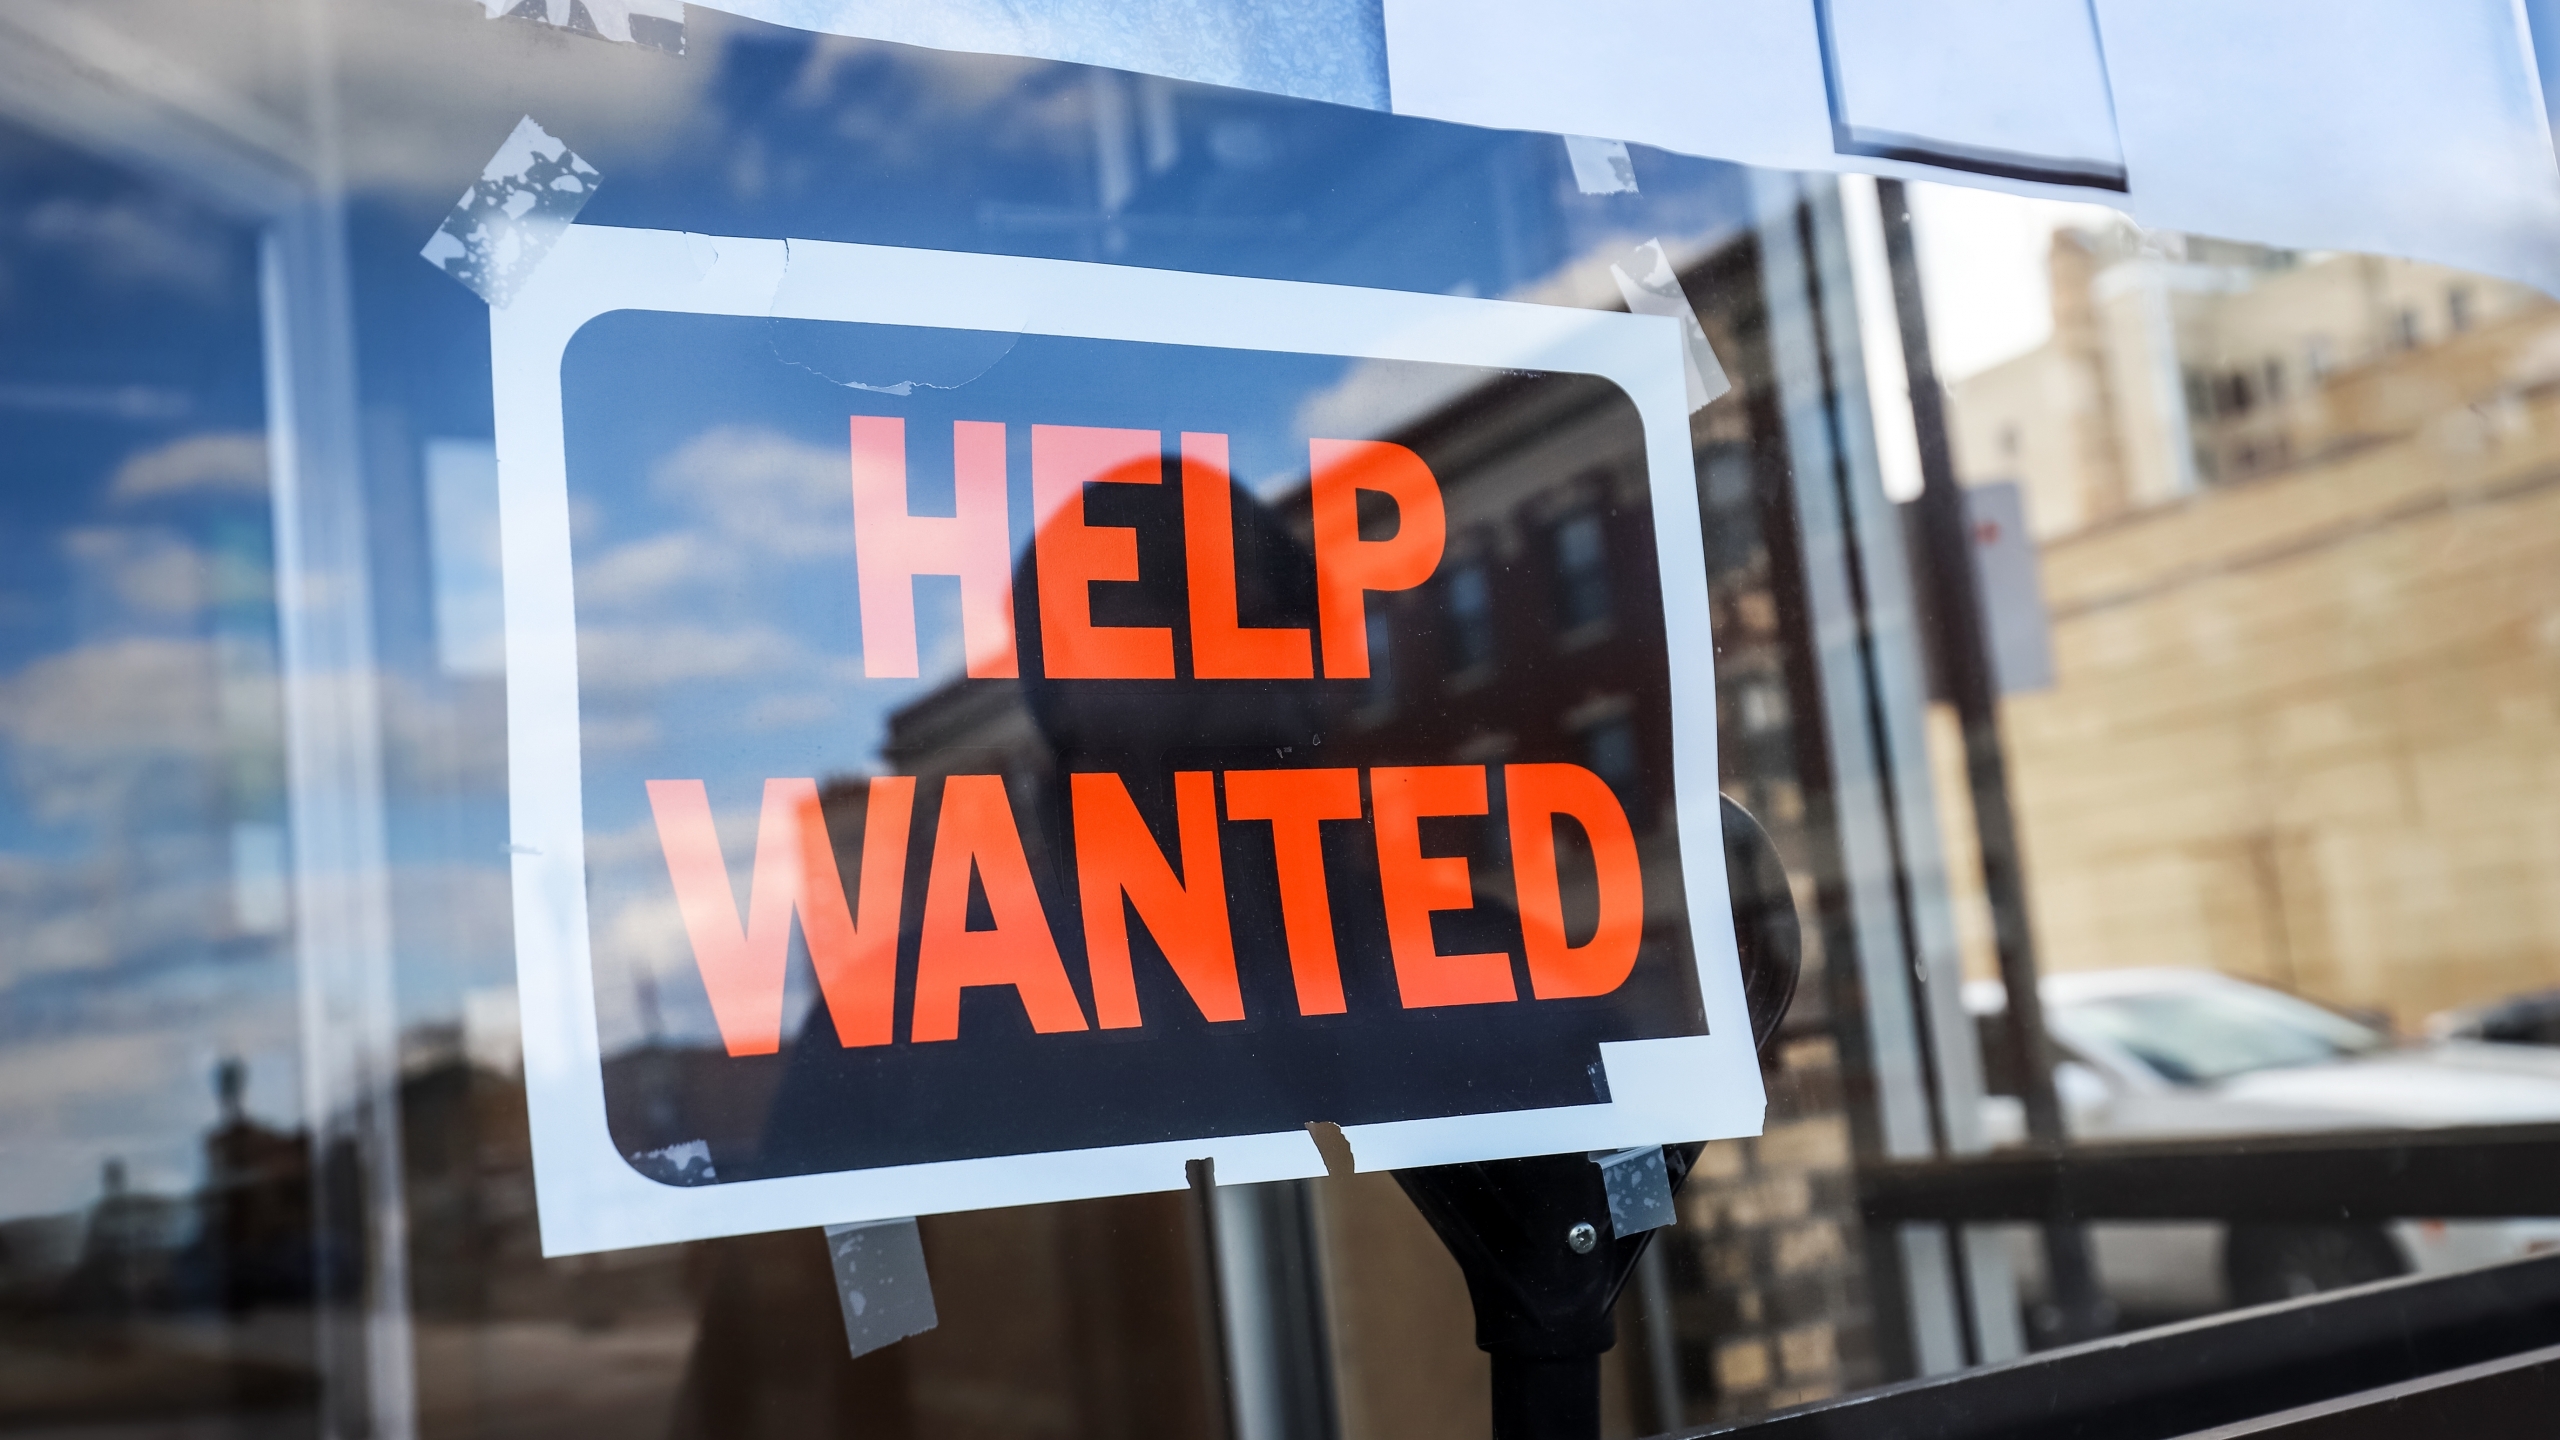 Reflection of a man looking at a help wanted sign in a business window, economy concept